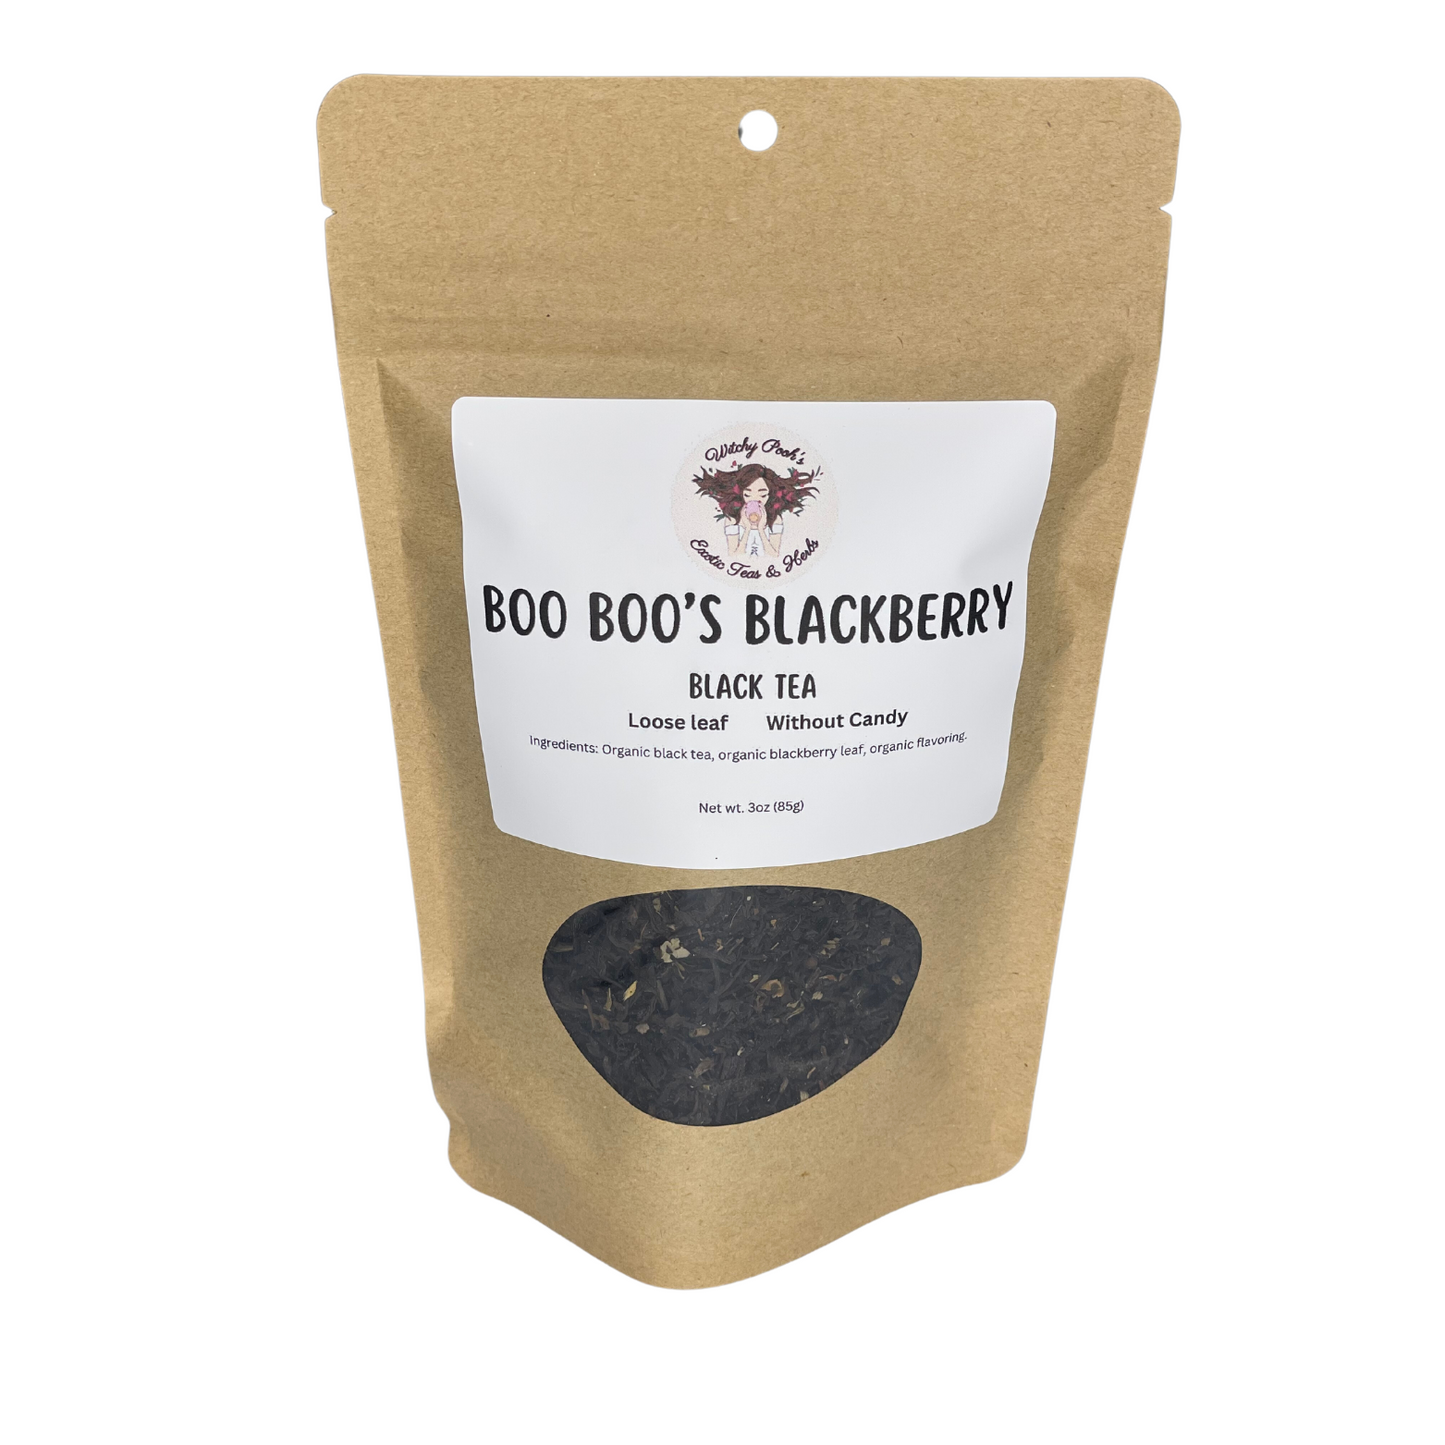 Witchy Pooh's Boo Boo's Blackberry Flavored Loose Leaf Black Tea